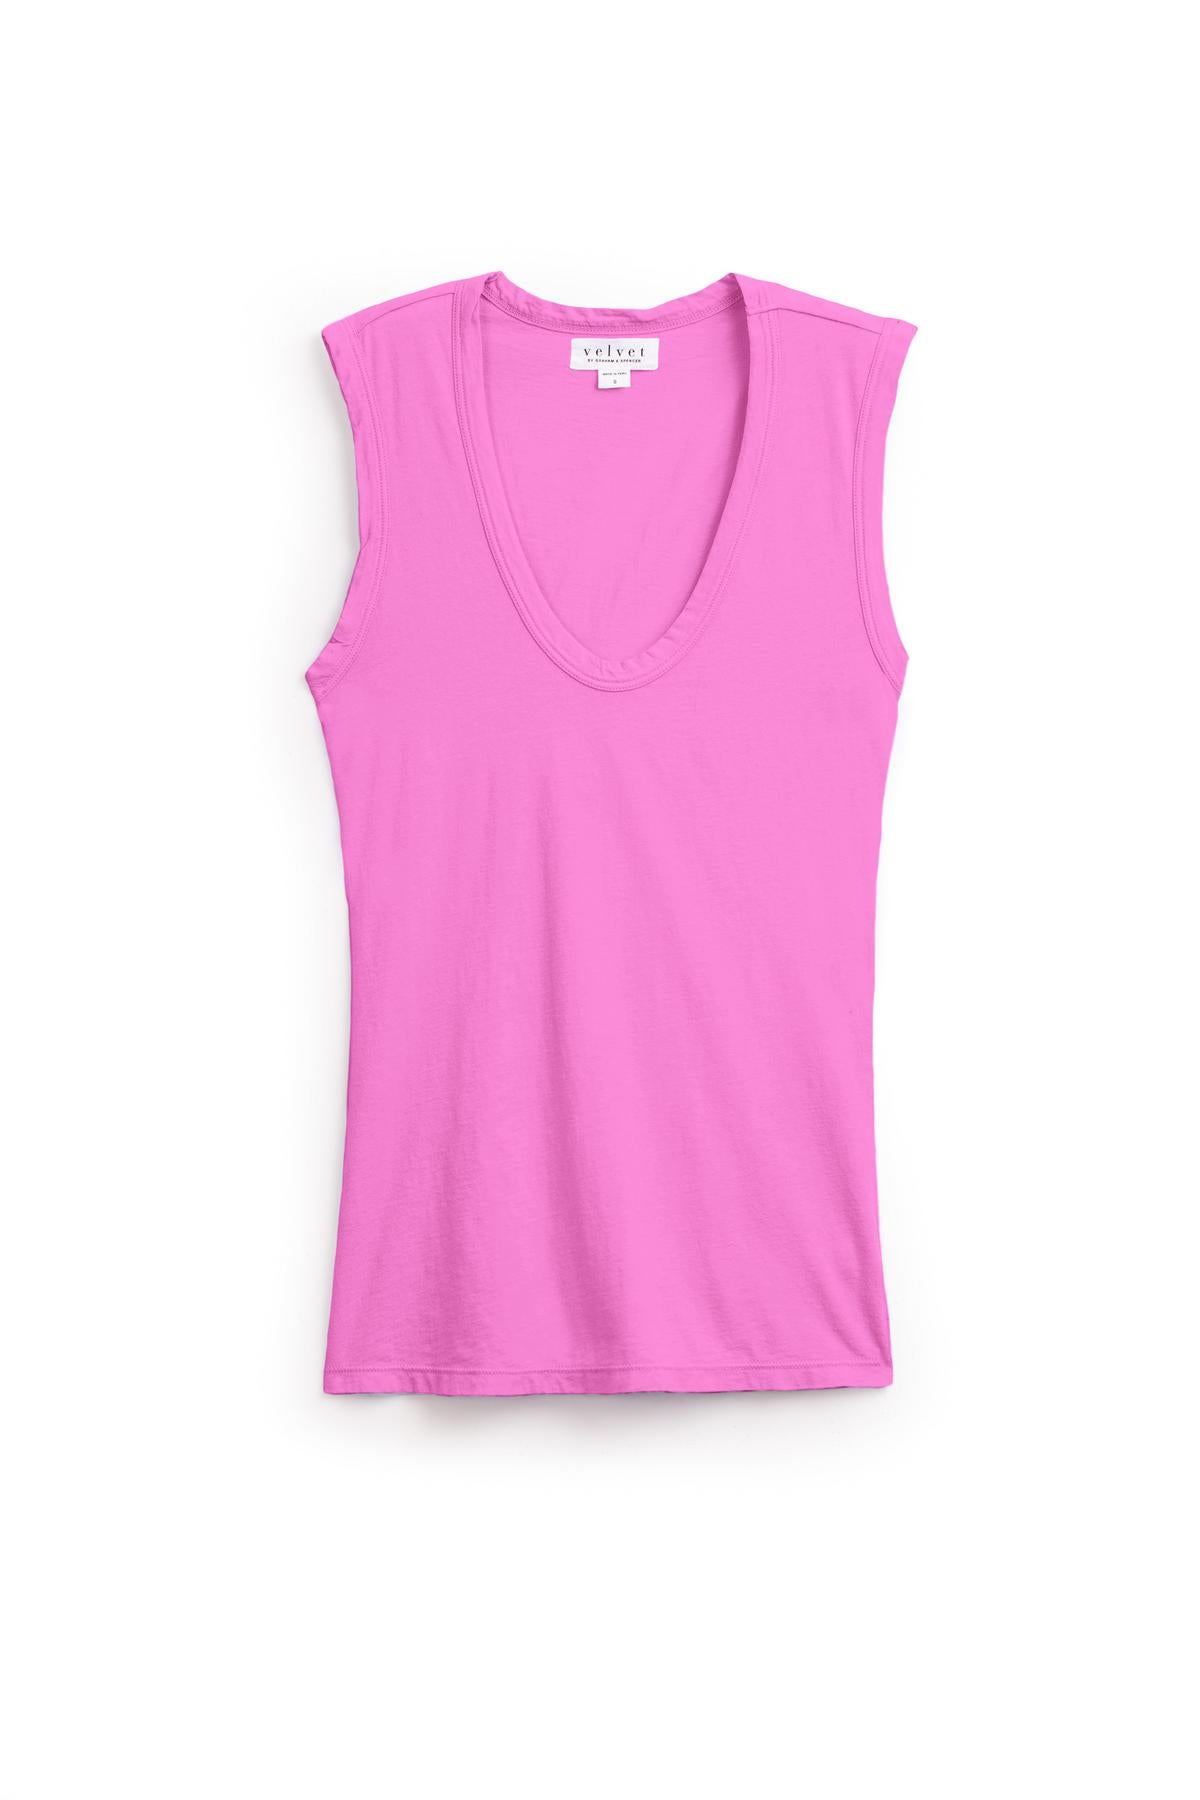 The ESTINA TANK TOP by Velvet by Graham & Spencer is a sleeveless, pink V-neck top on a white background, exuding the laid-back charm of a wearable tank. The top features a label on the inner collar.-37606508134593